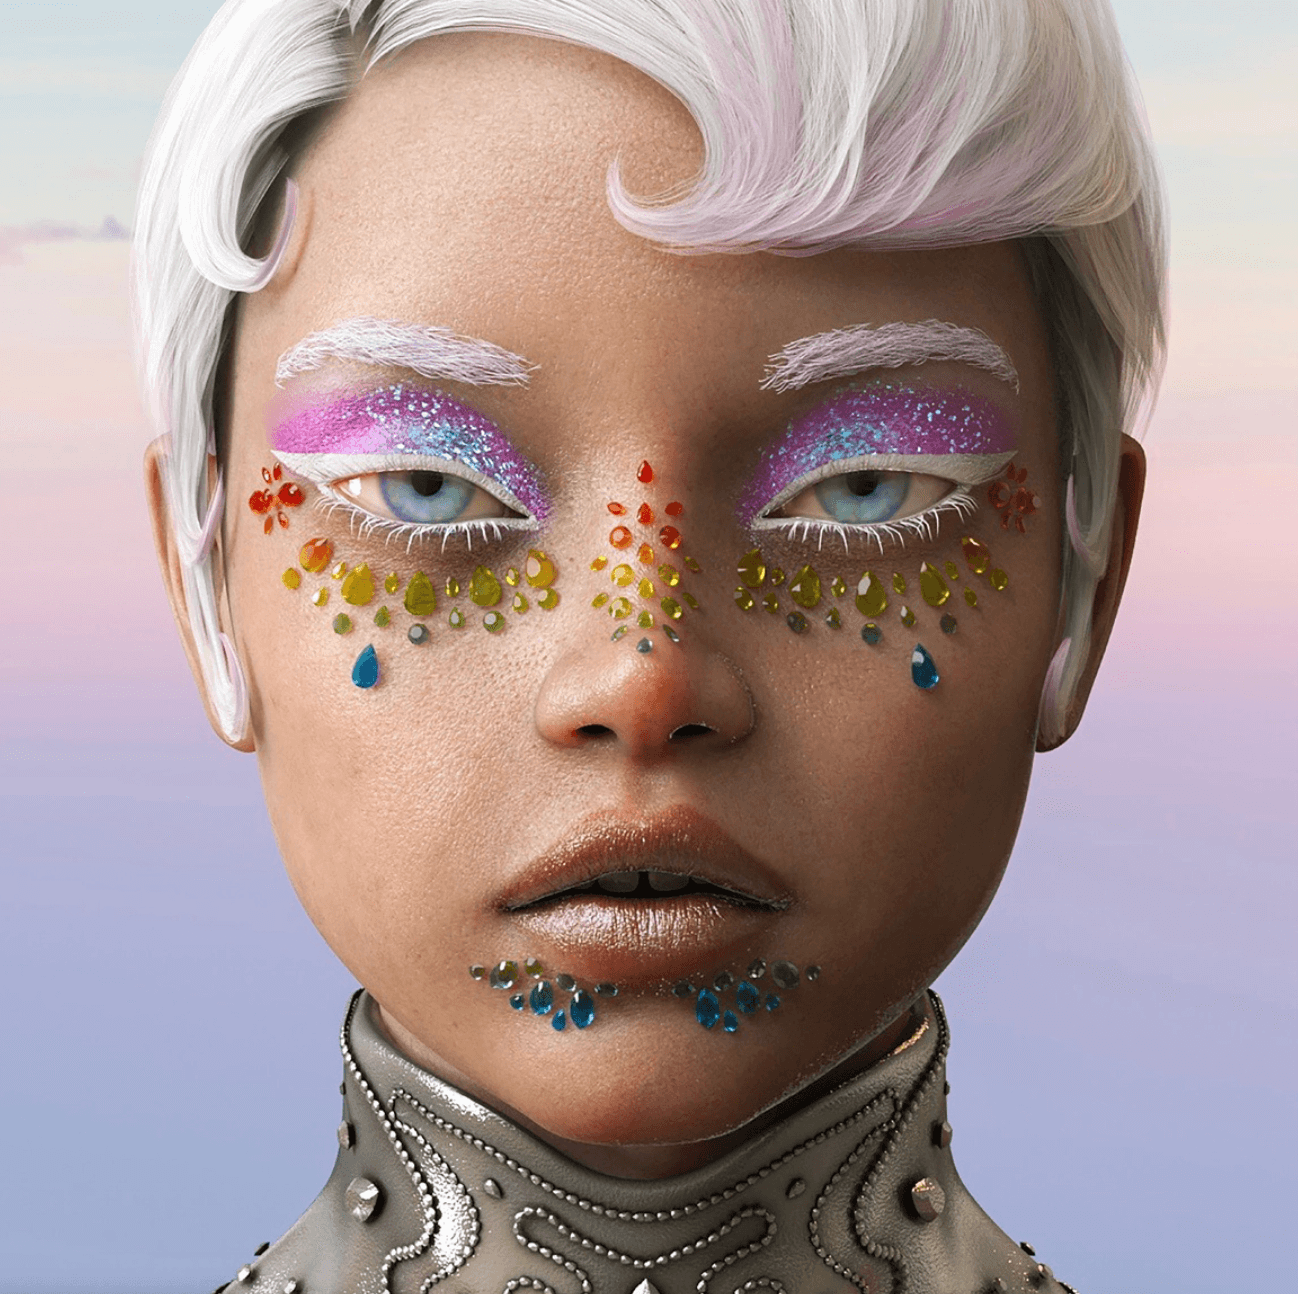 NYX Professional Makeup Introduces GORJS, the first DAO Dedicated to Virtual Makeup in the Metaverse